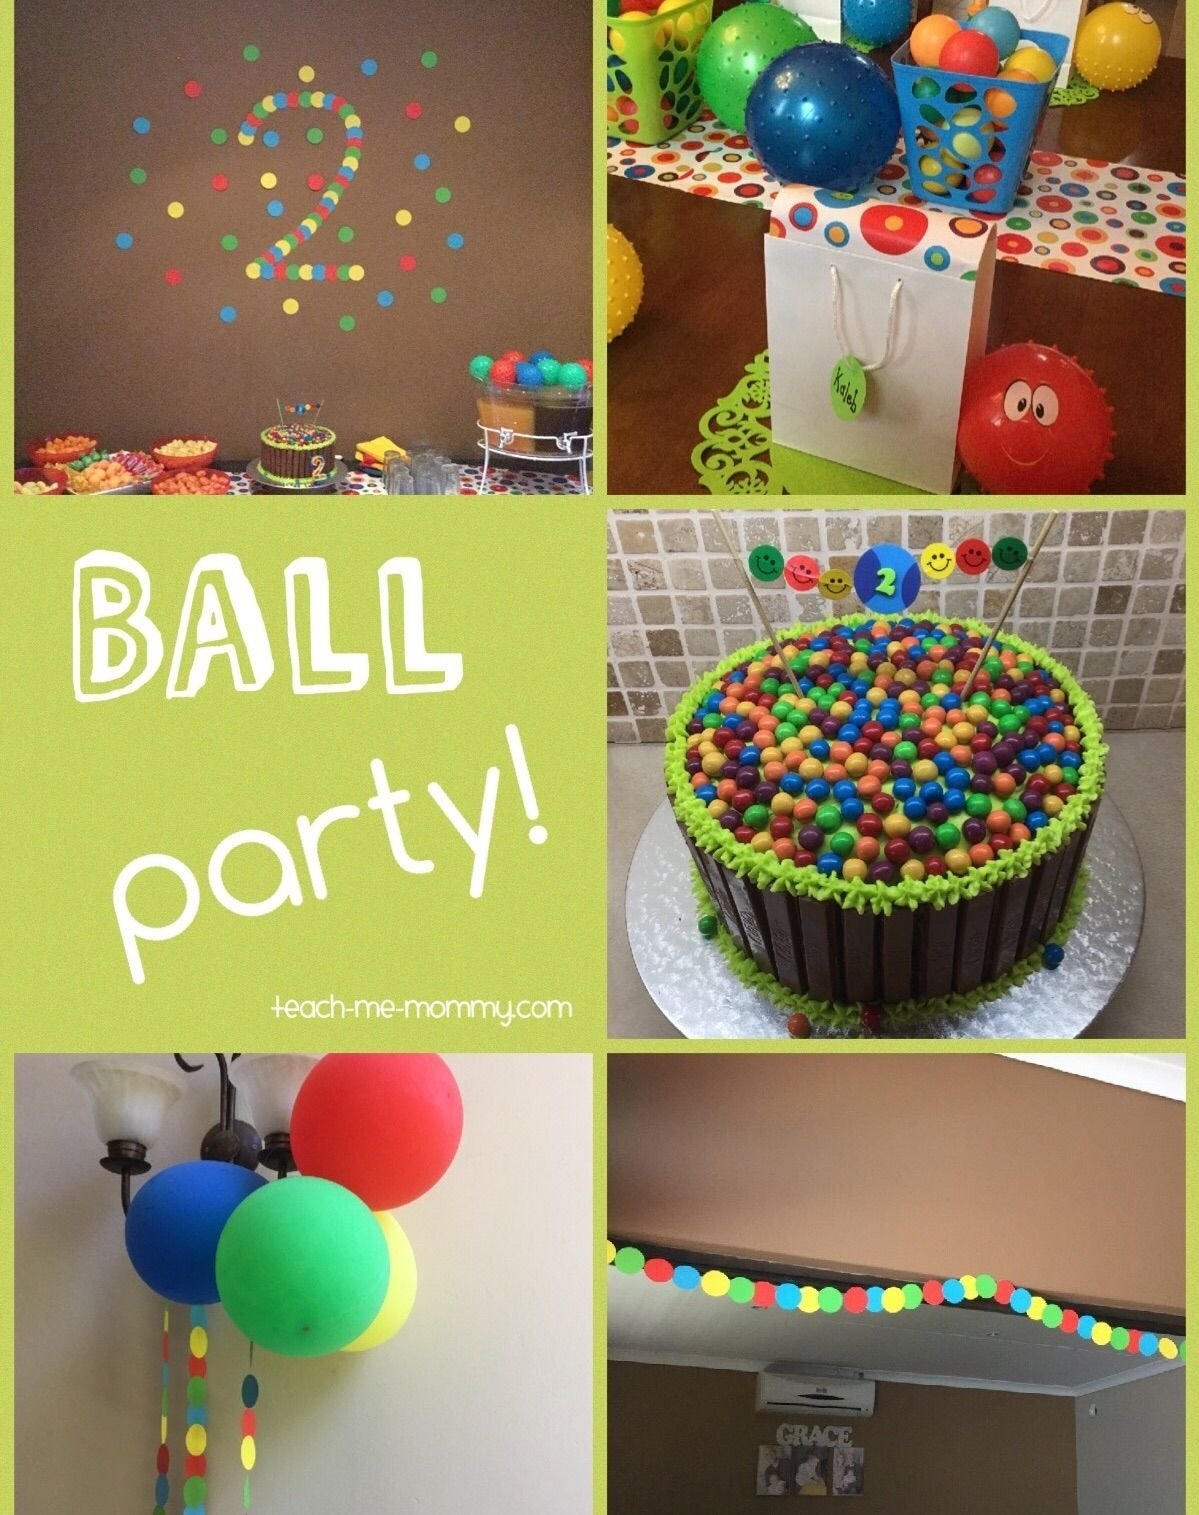 10 Most Recommended Birthday Party Ideas For 2 Year Old Boy ball themed party for a 2 year old themed parties birthdays and 10 2022